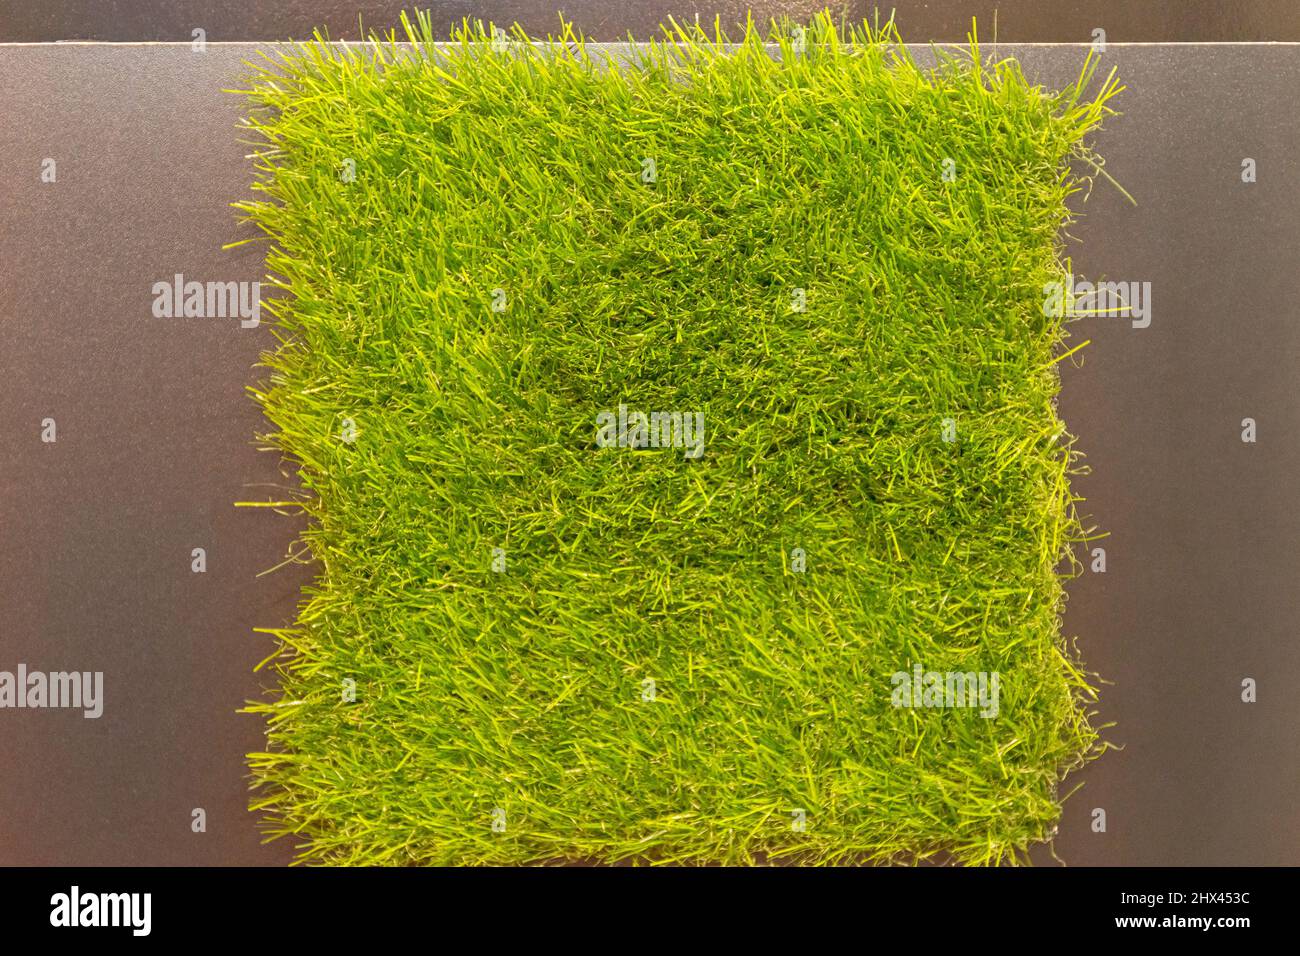 Synthethic Green Grass Patch for Artificial Gardens Stock Photo